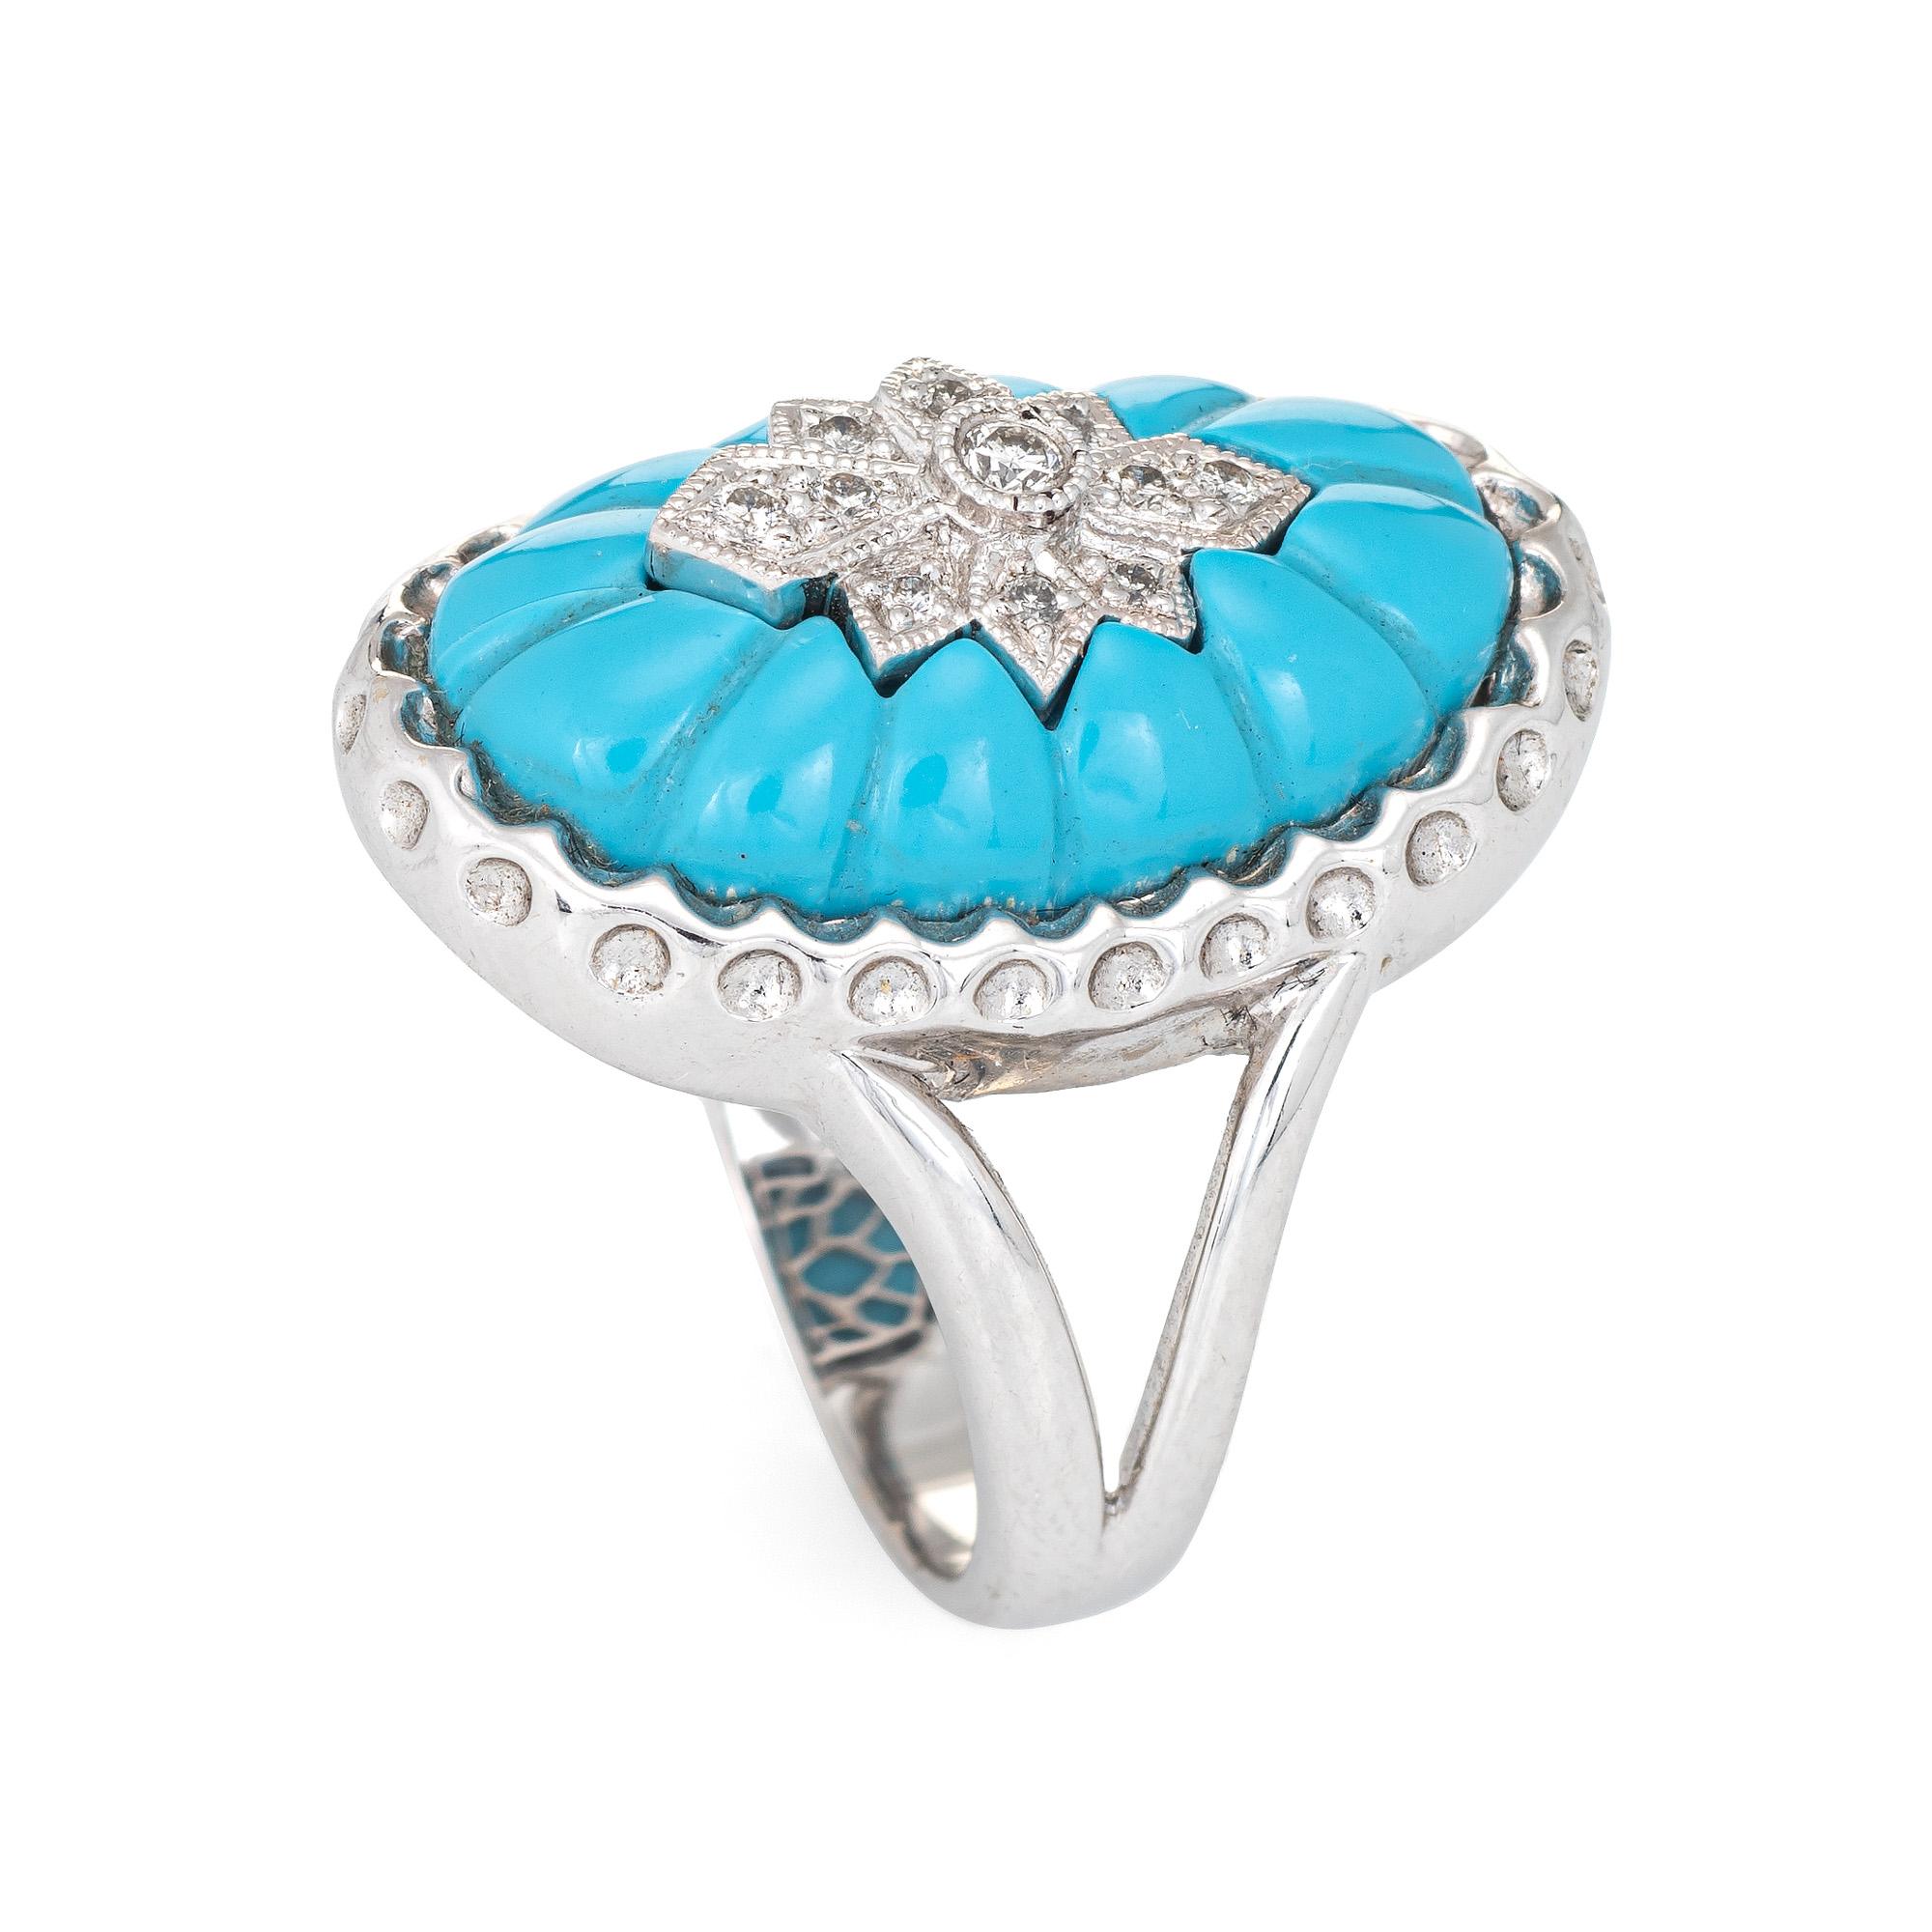 Elegant estate cocktail ring, crafted in 14 karat white gold. 

Fluted turquoise adorns the mount and totals an estimated 6.06 carats, accented with an estimated 0.13 carats of diamonds (estimated at I color and SI1 clarity). The turquoise is in